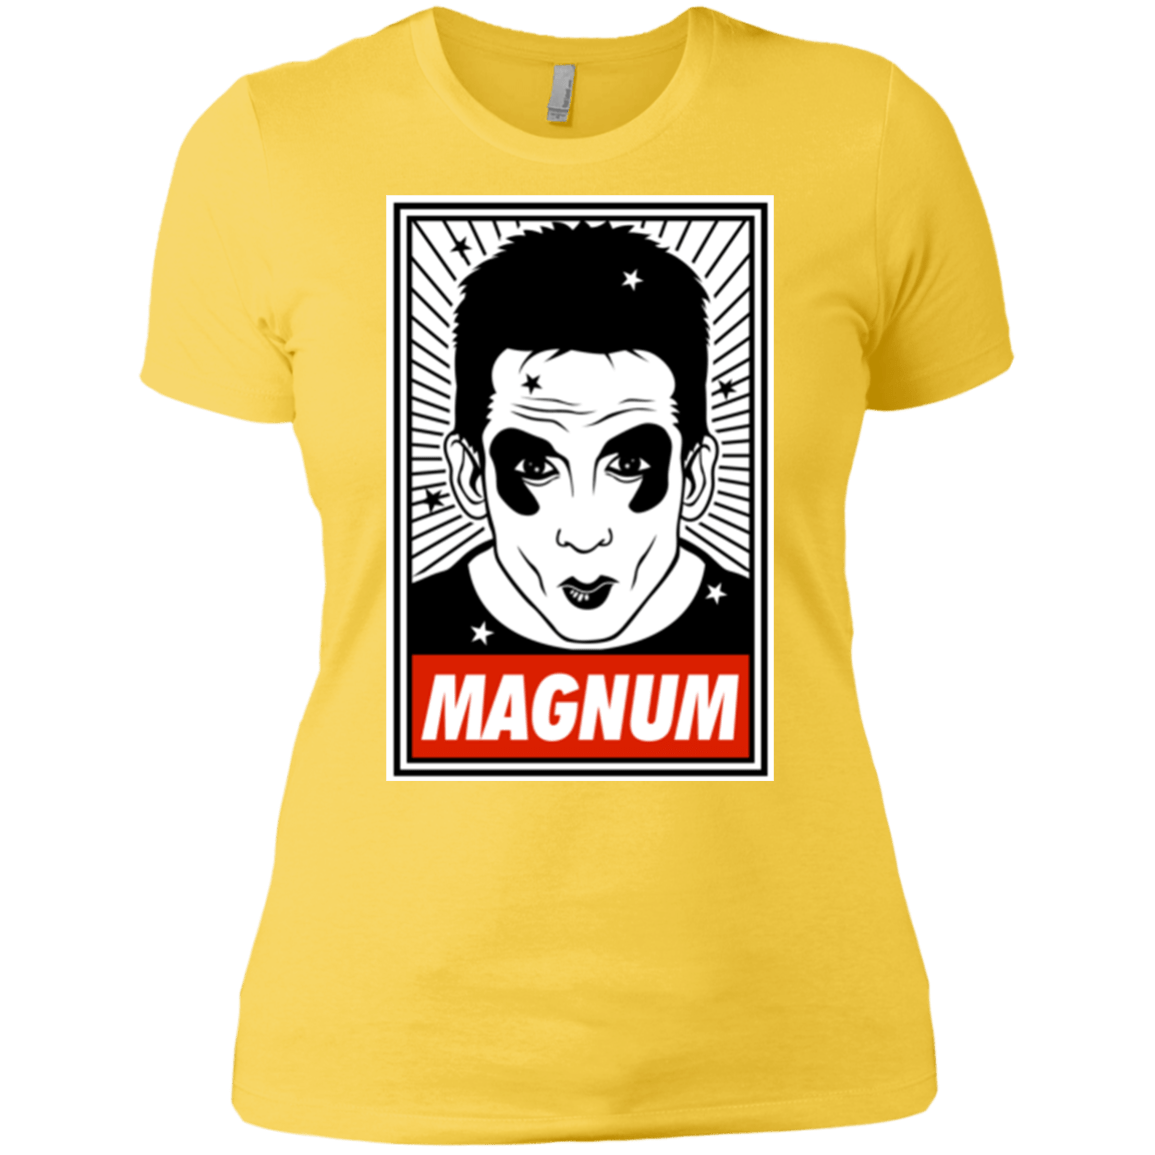 T-Shirts Vibrant Yellow / X-Small Ridiculously good looking Women's Premium T-Shirt